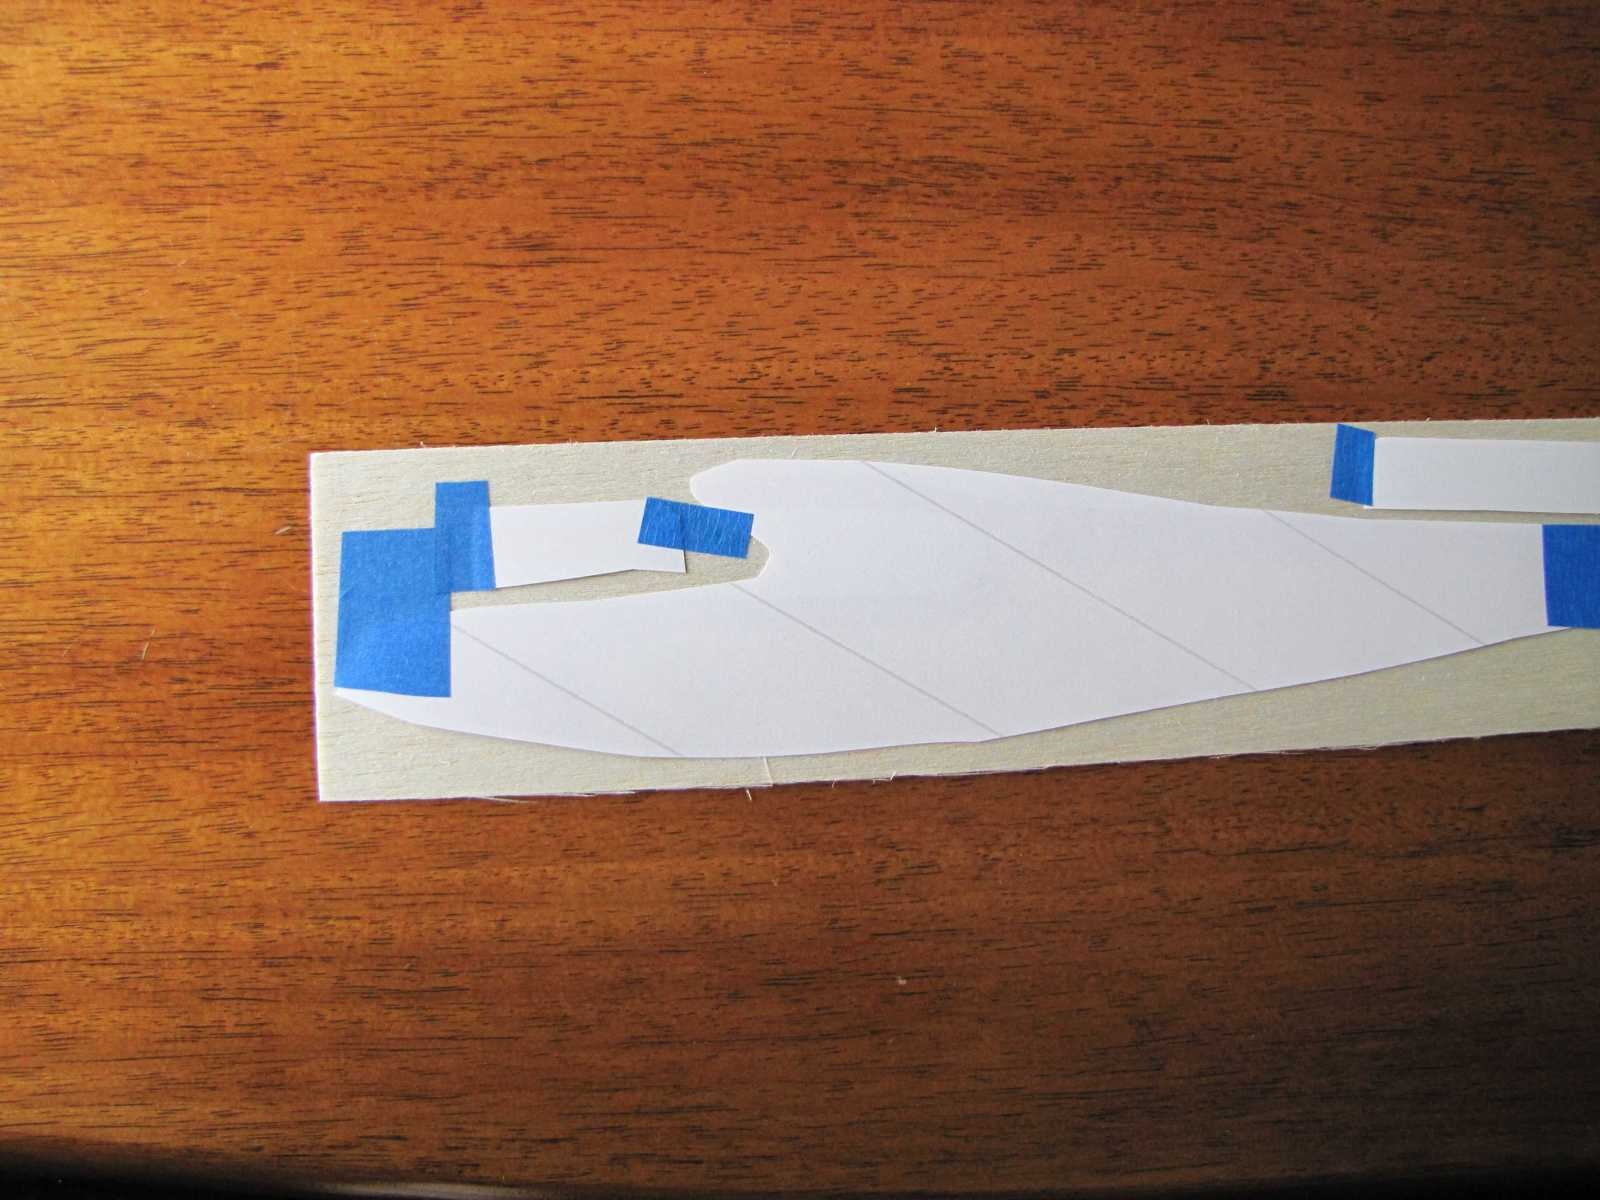 Place the printed parts on your sheet of balsa. Any thickness balsa sheet can be used. The example shown is 1/32" balsa sheet. Some tape may be useful in keeping them in position. It is important that the transfer paper not move while it is being ironed or the parts will blur.